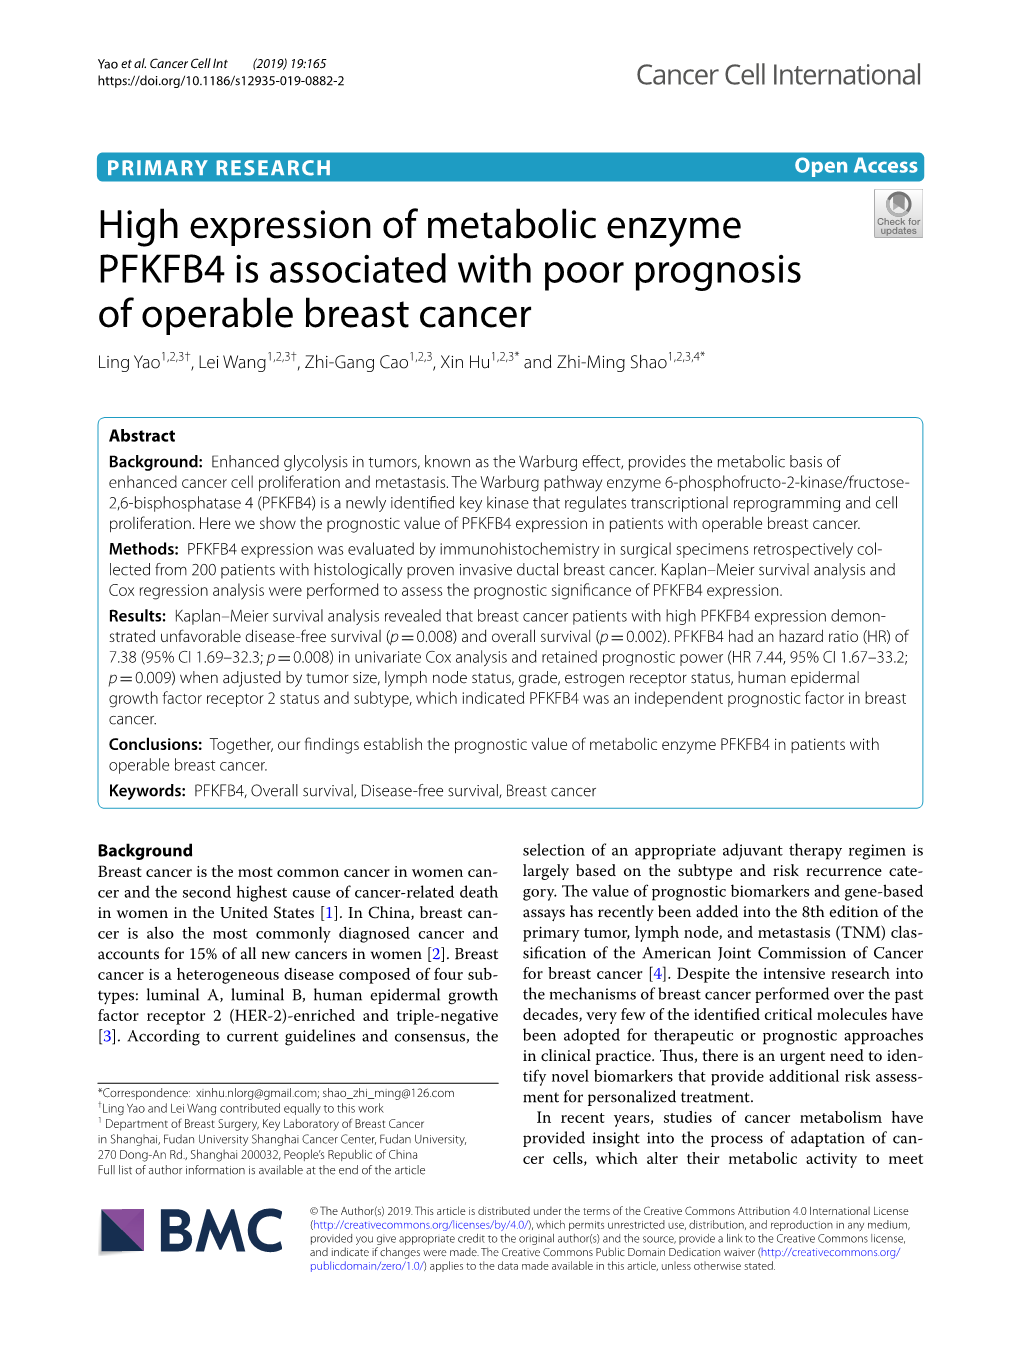 High Expression of Metabolic Enzyme PFKFB4 Is Associated with Poor